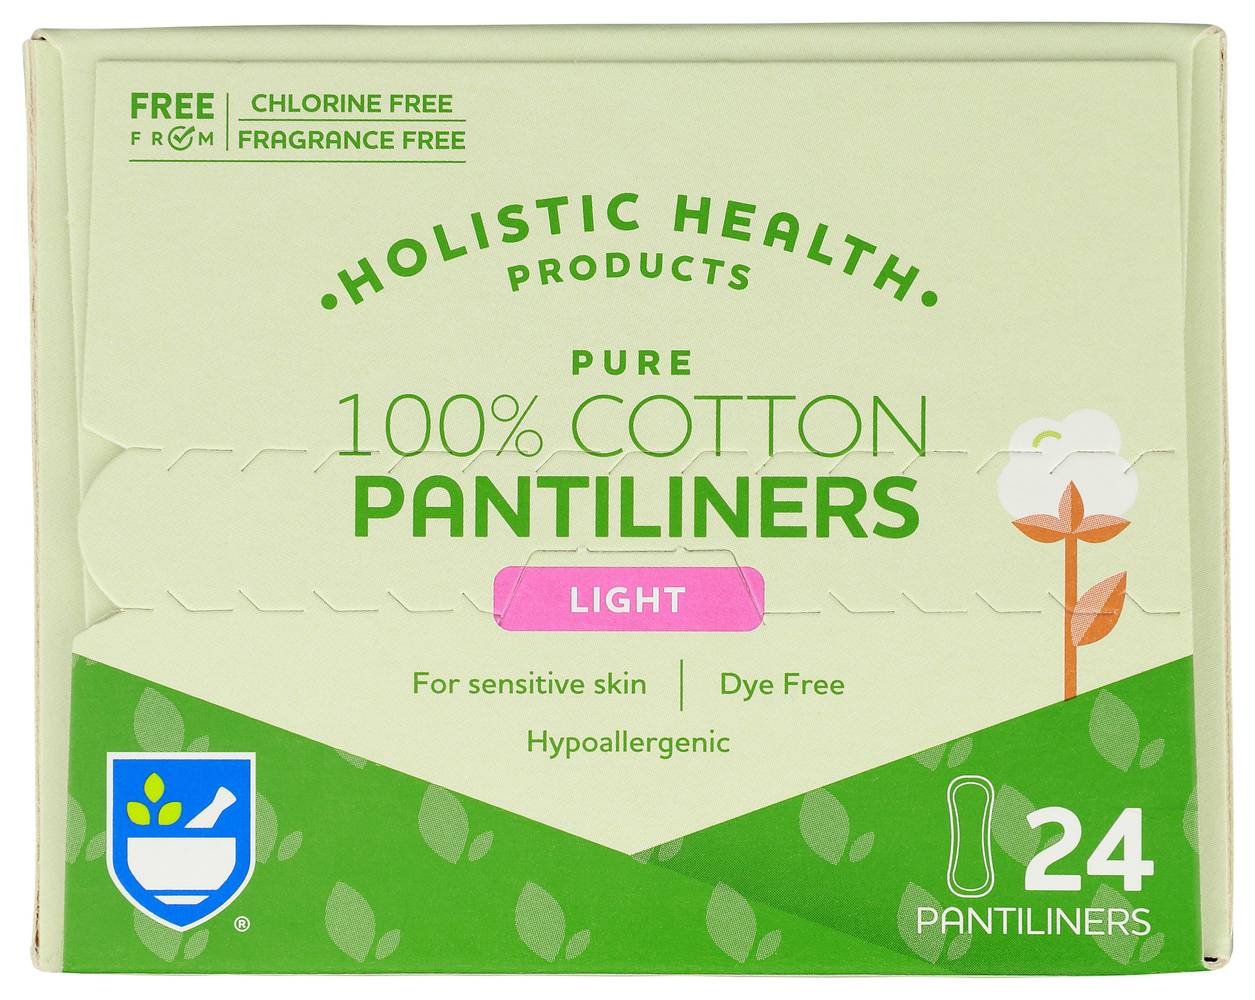 Rite Aid Pure 100% Cotton Pantiliner - Light Absorbency, 24 ct